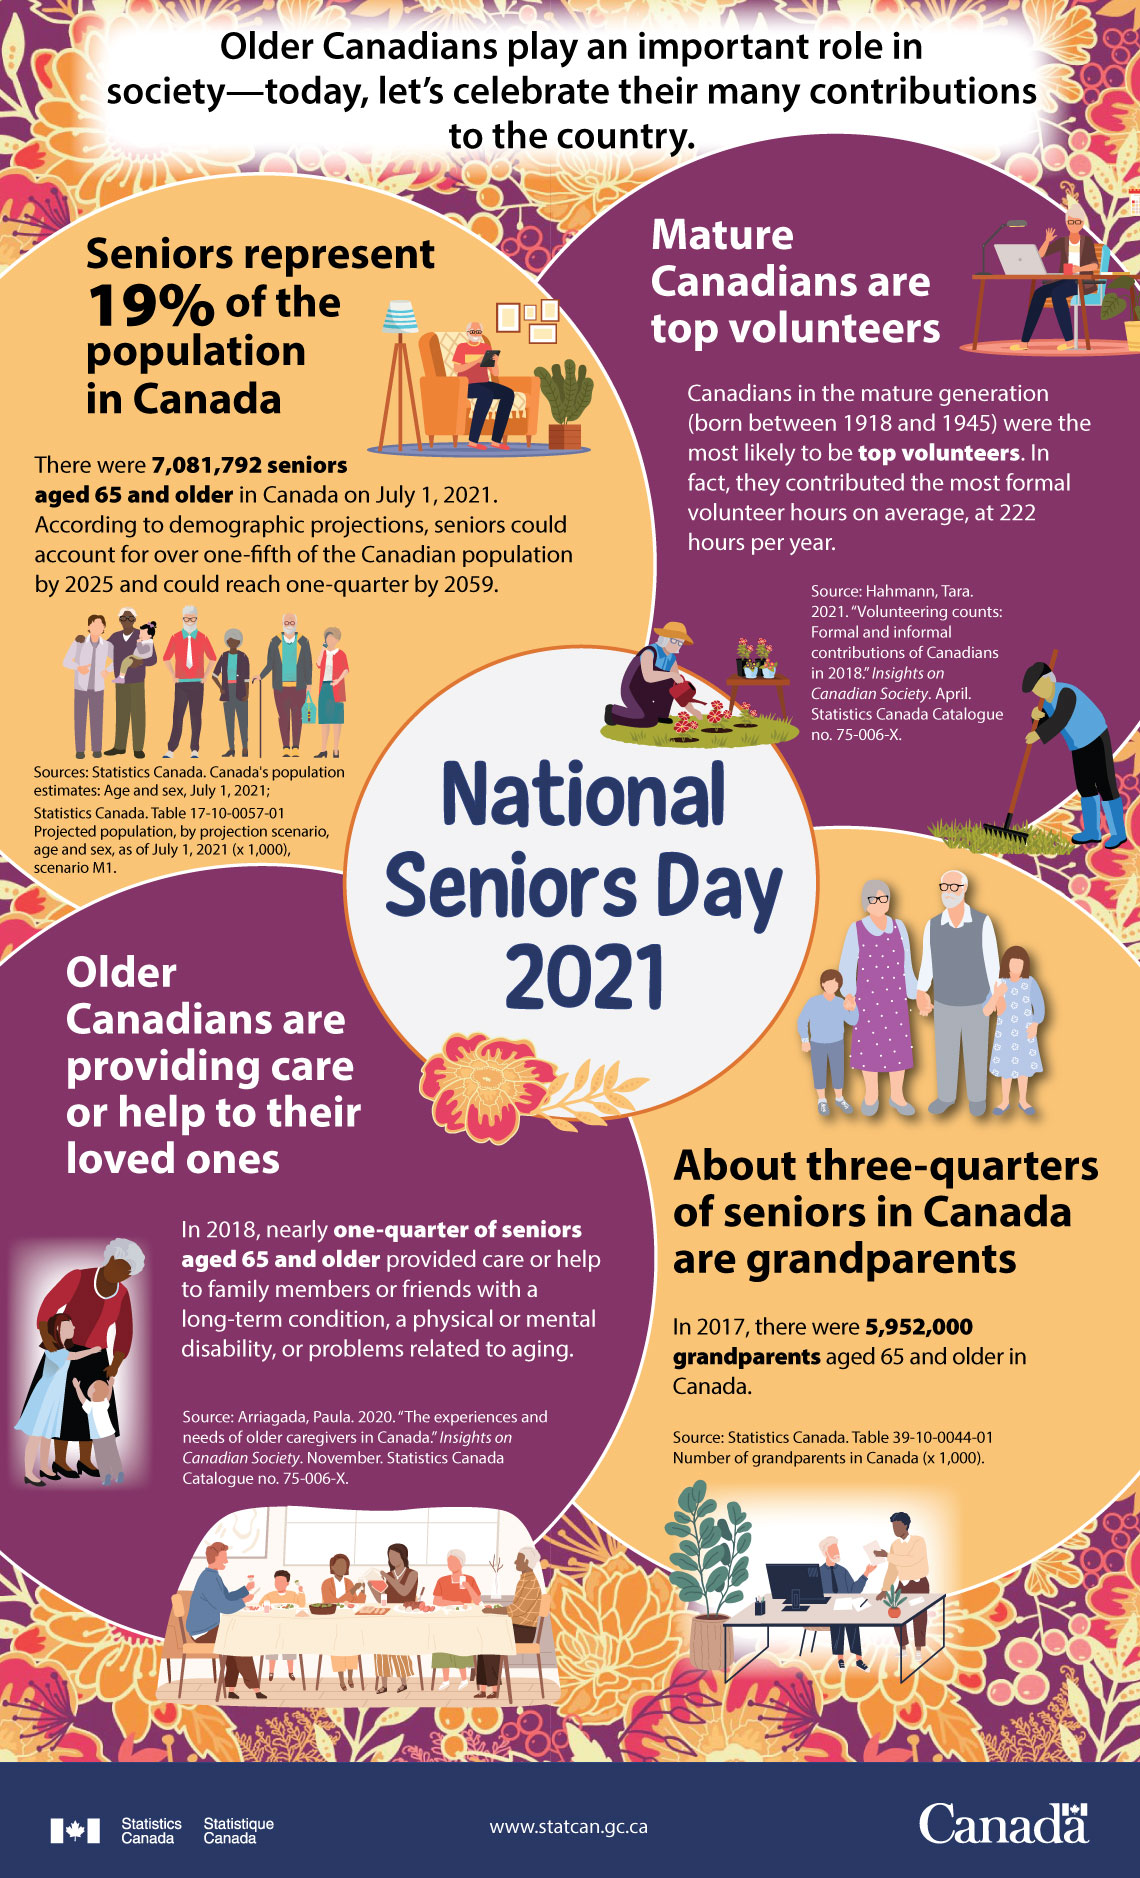 By the numbers: National Seniors Day 2021